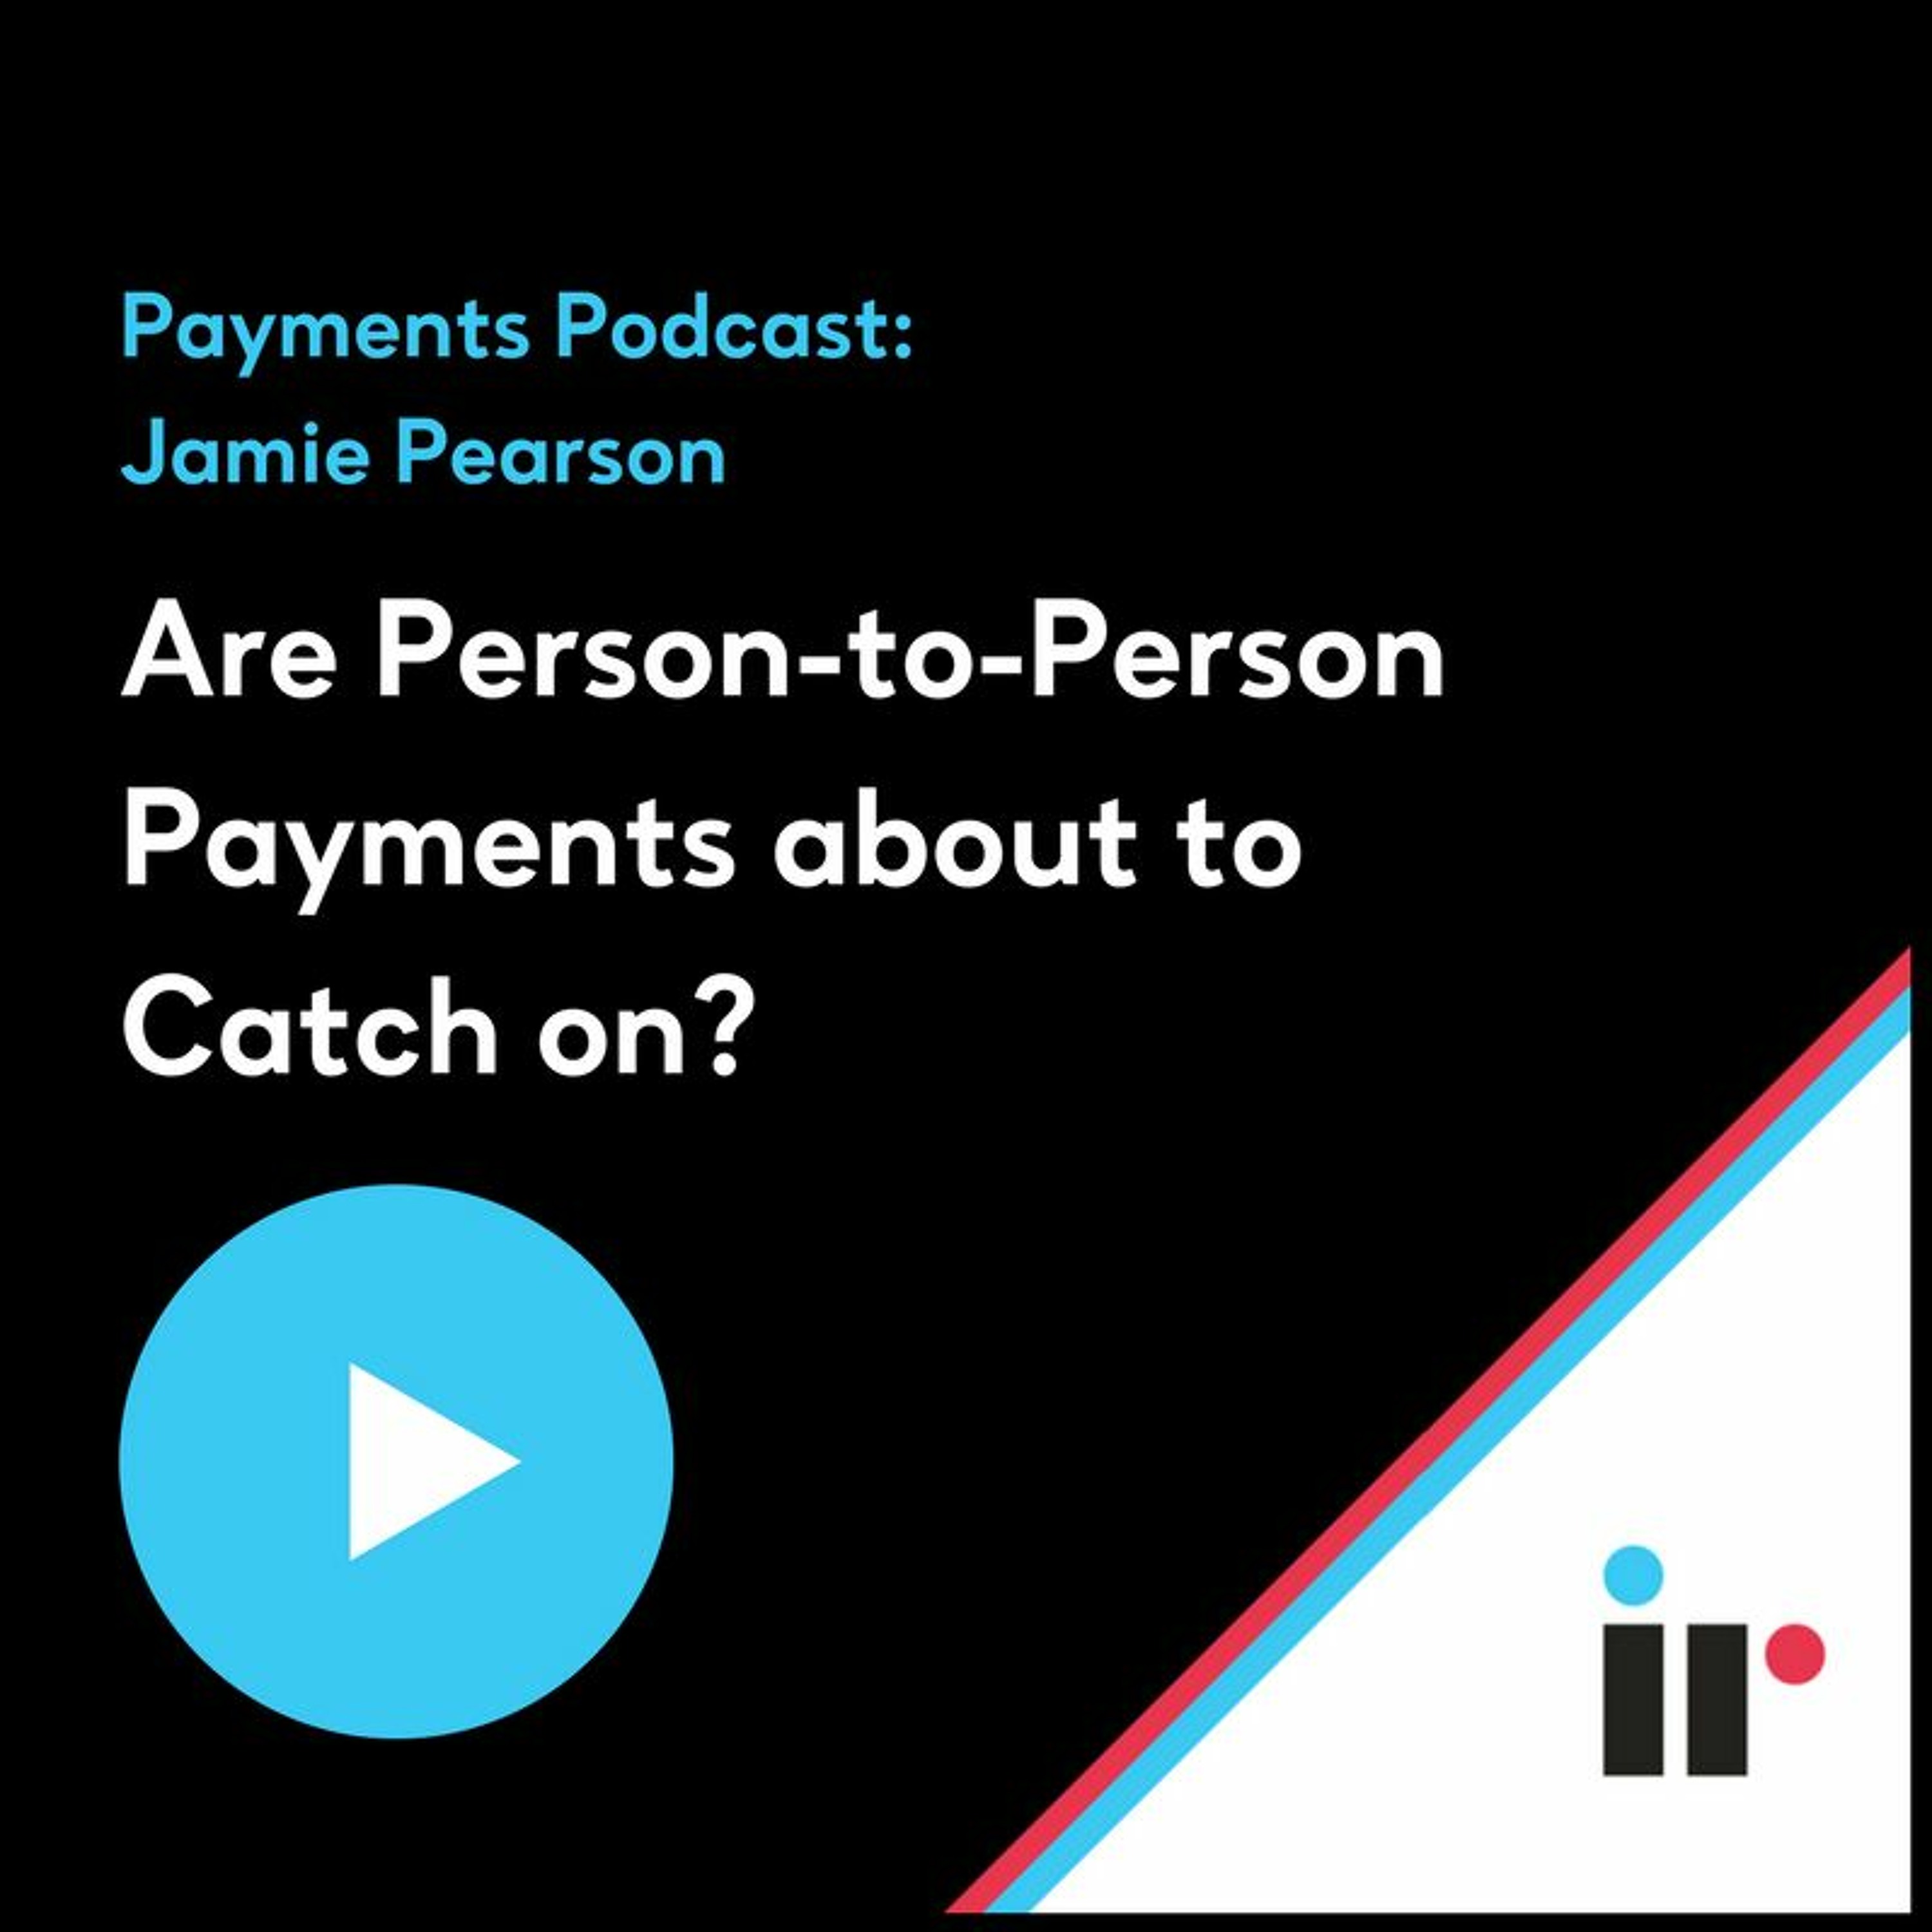 Are Person-to-Person Payments about to Catch on?